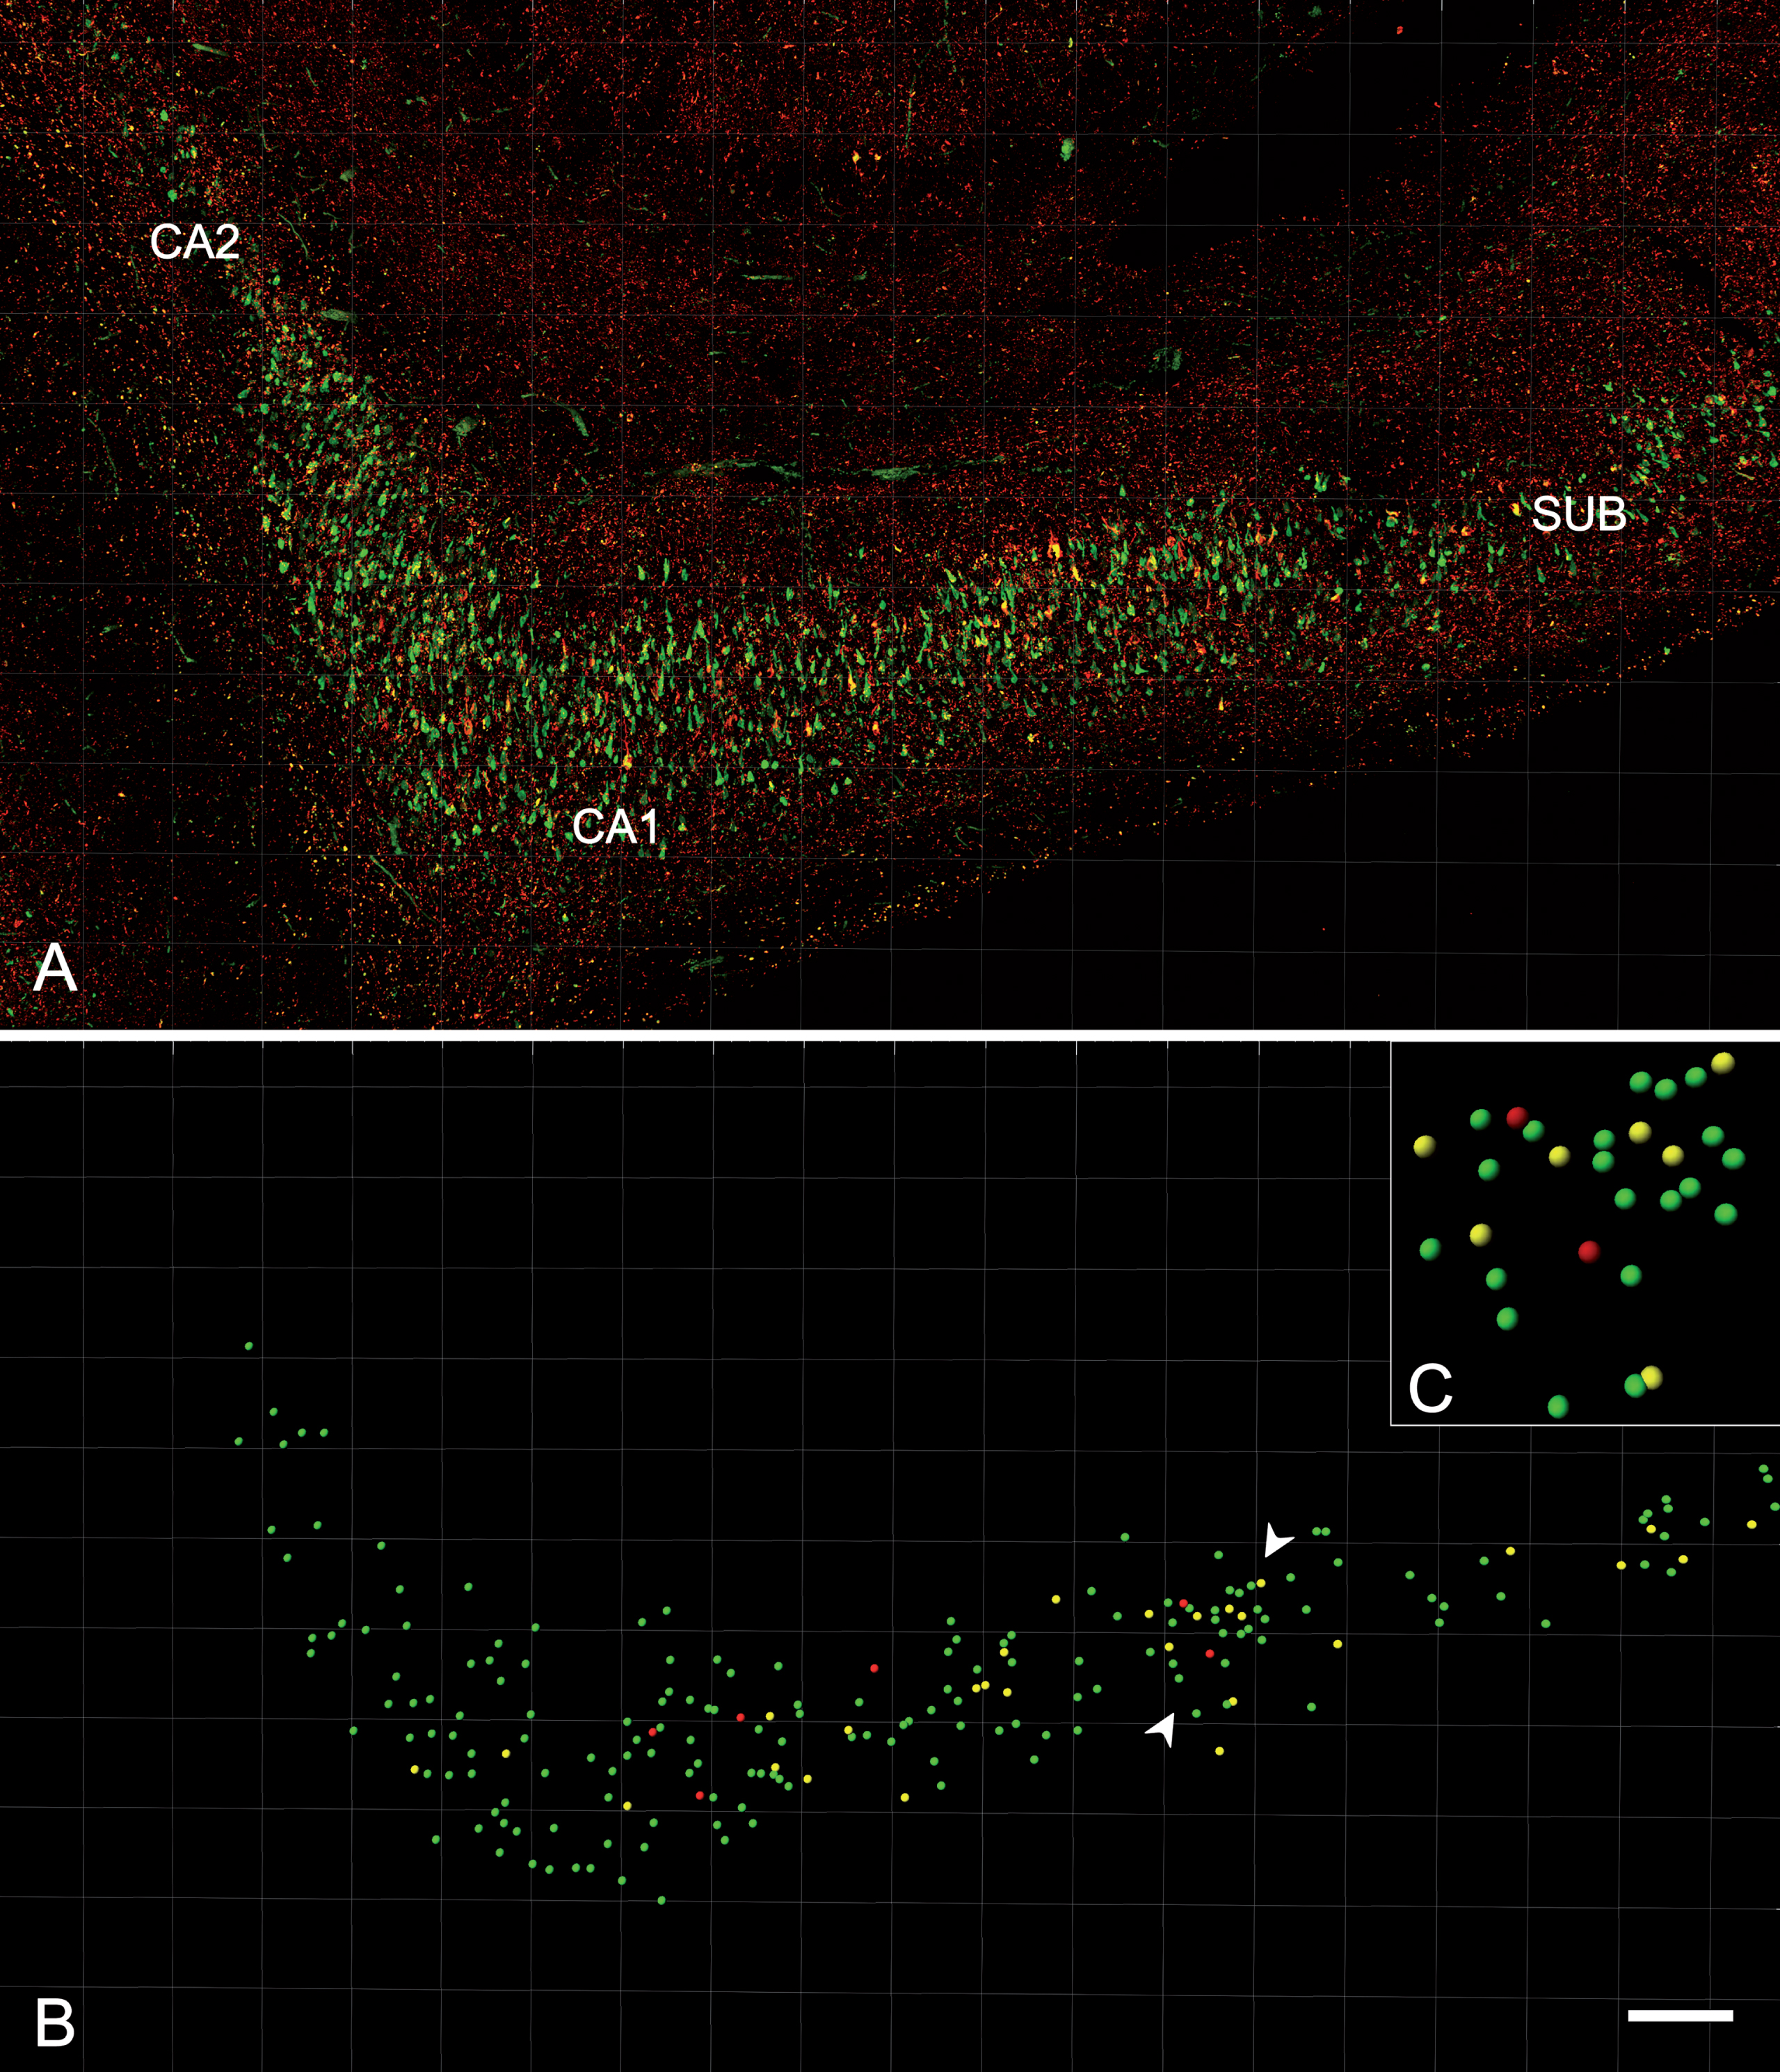 Analysis of the distribution and expression of PHF-Tau-ir neurons using Imaris software. A) Confocal microscopy image showing a double-immunostained section for PHFpS396 (green) and PHFAT8 (red) antibodies, in CA1 region from patient Az4. The entire CA1 region can be visualized. B) Spots are assigned to each neuron, easily visualized when confocal channels are turned off. C) The rectangle is a higher magnification of the region marked by the arrowheads in B. The different spot colors correspond to PHFpS396-ir neurons (green), PHFAT8-ir neurons (red), and coexpressing neurons (yellow). Scale bar: 200μm (in B); 50μm in (C).